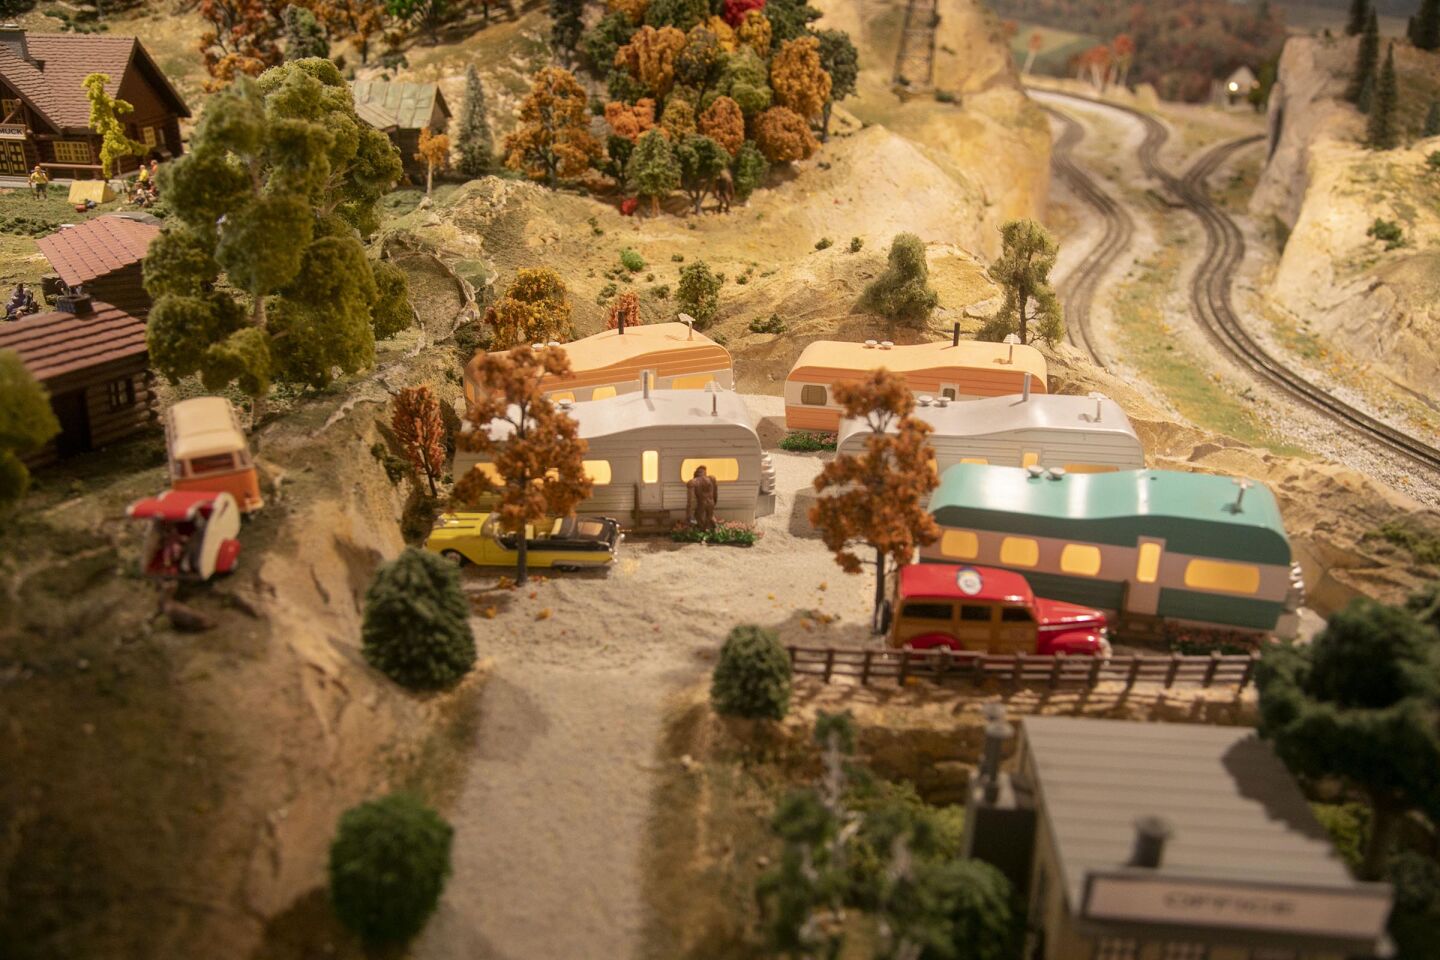 David Lizerbram and his wife Mana Monzavi took over the Old Town Model Railroad Depot, which was in danger of closing. The extensive train layout and its detailed and sometimes humorous dioramas was photographed on Friday, Dec. 13, 2019, at its Old Town, San Diego location.